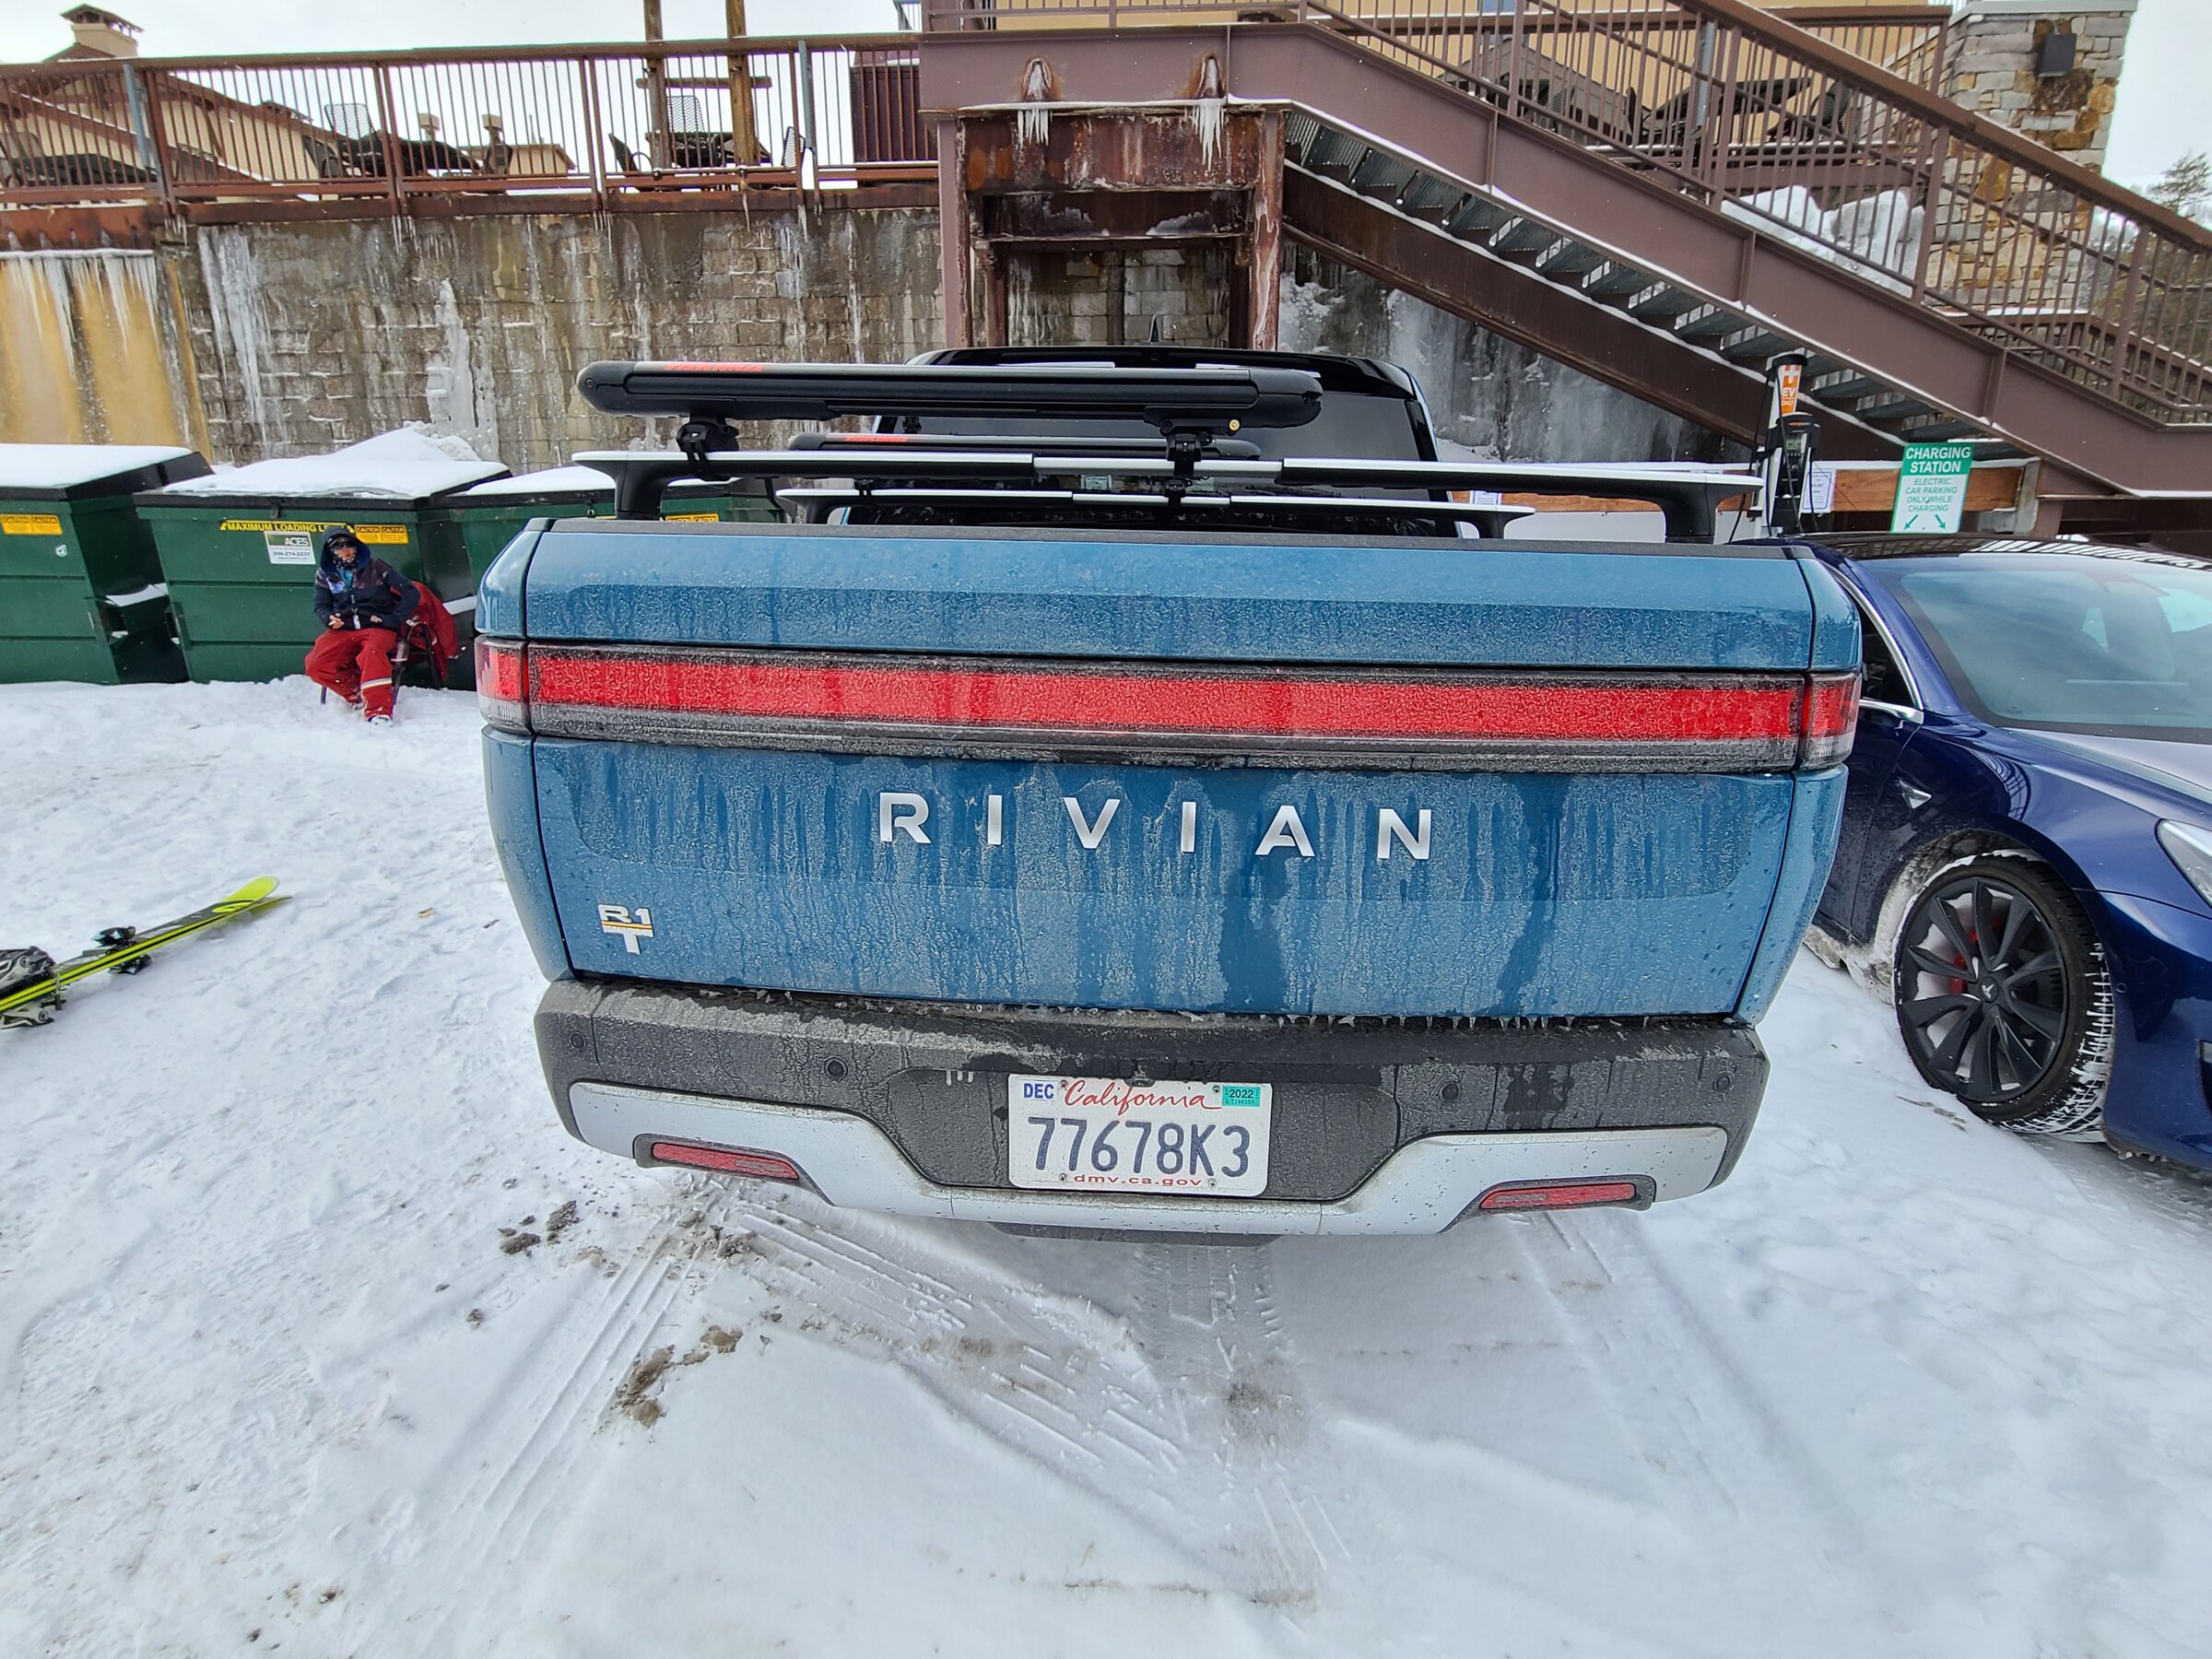 Rivian R1T R1S Rivian R1T spotted in South Seattle today! (photos, videos, impressions) 20220305_101159